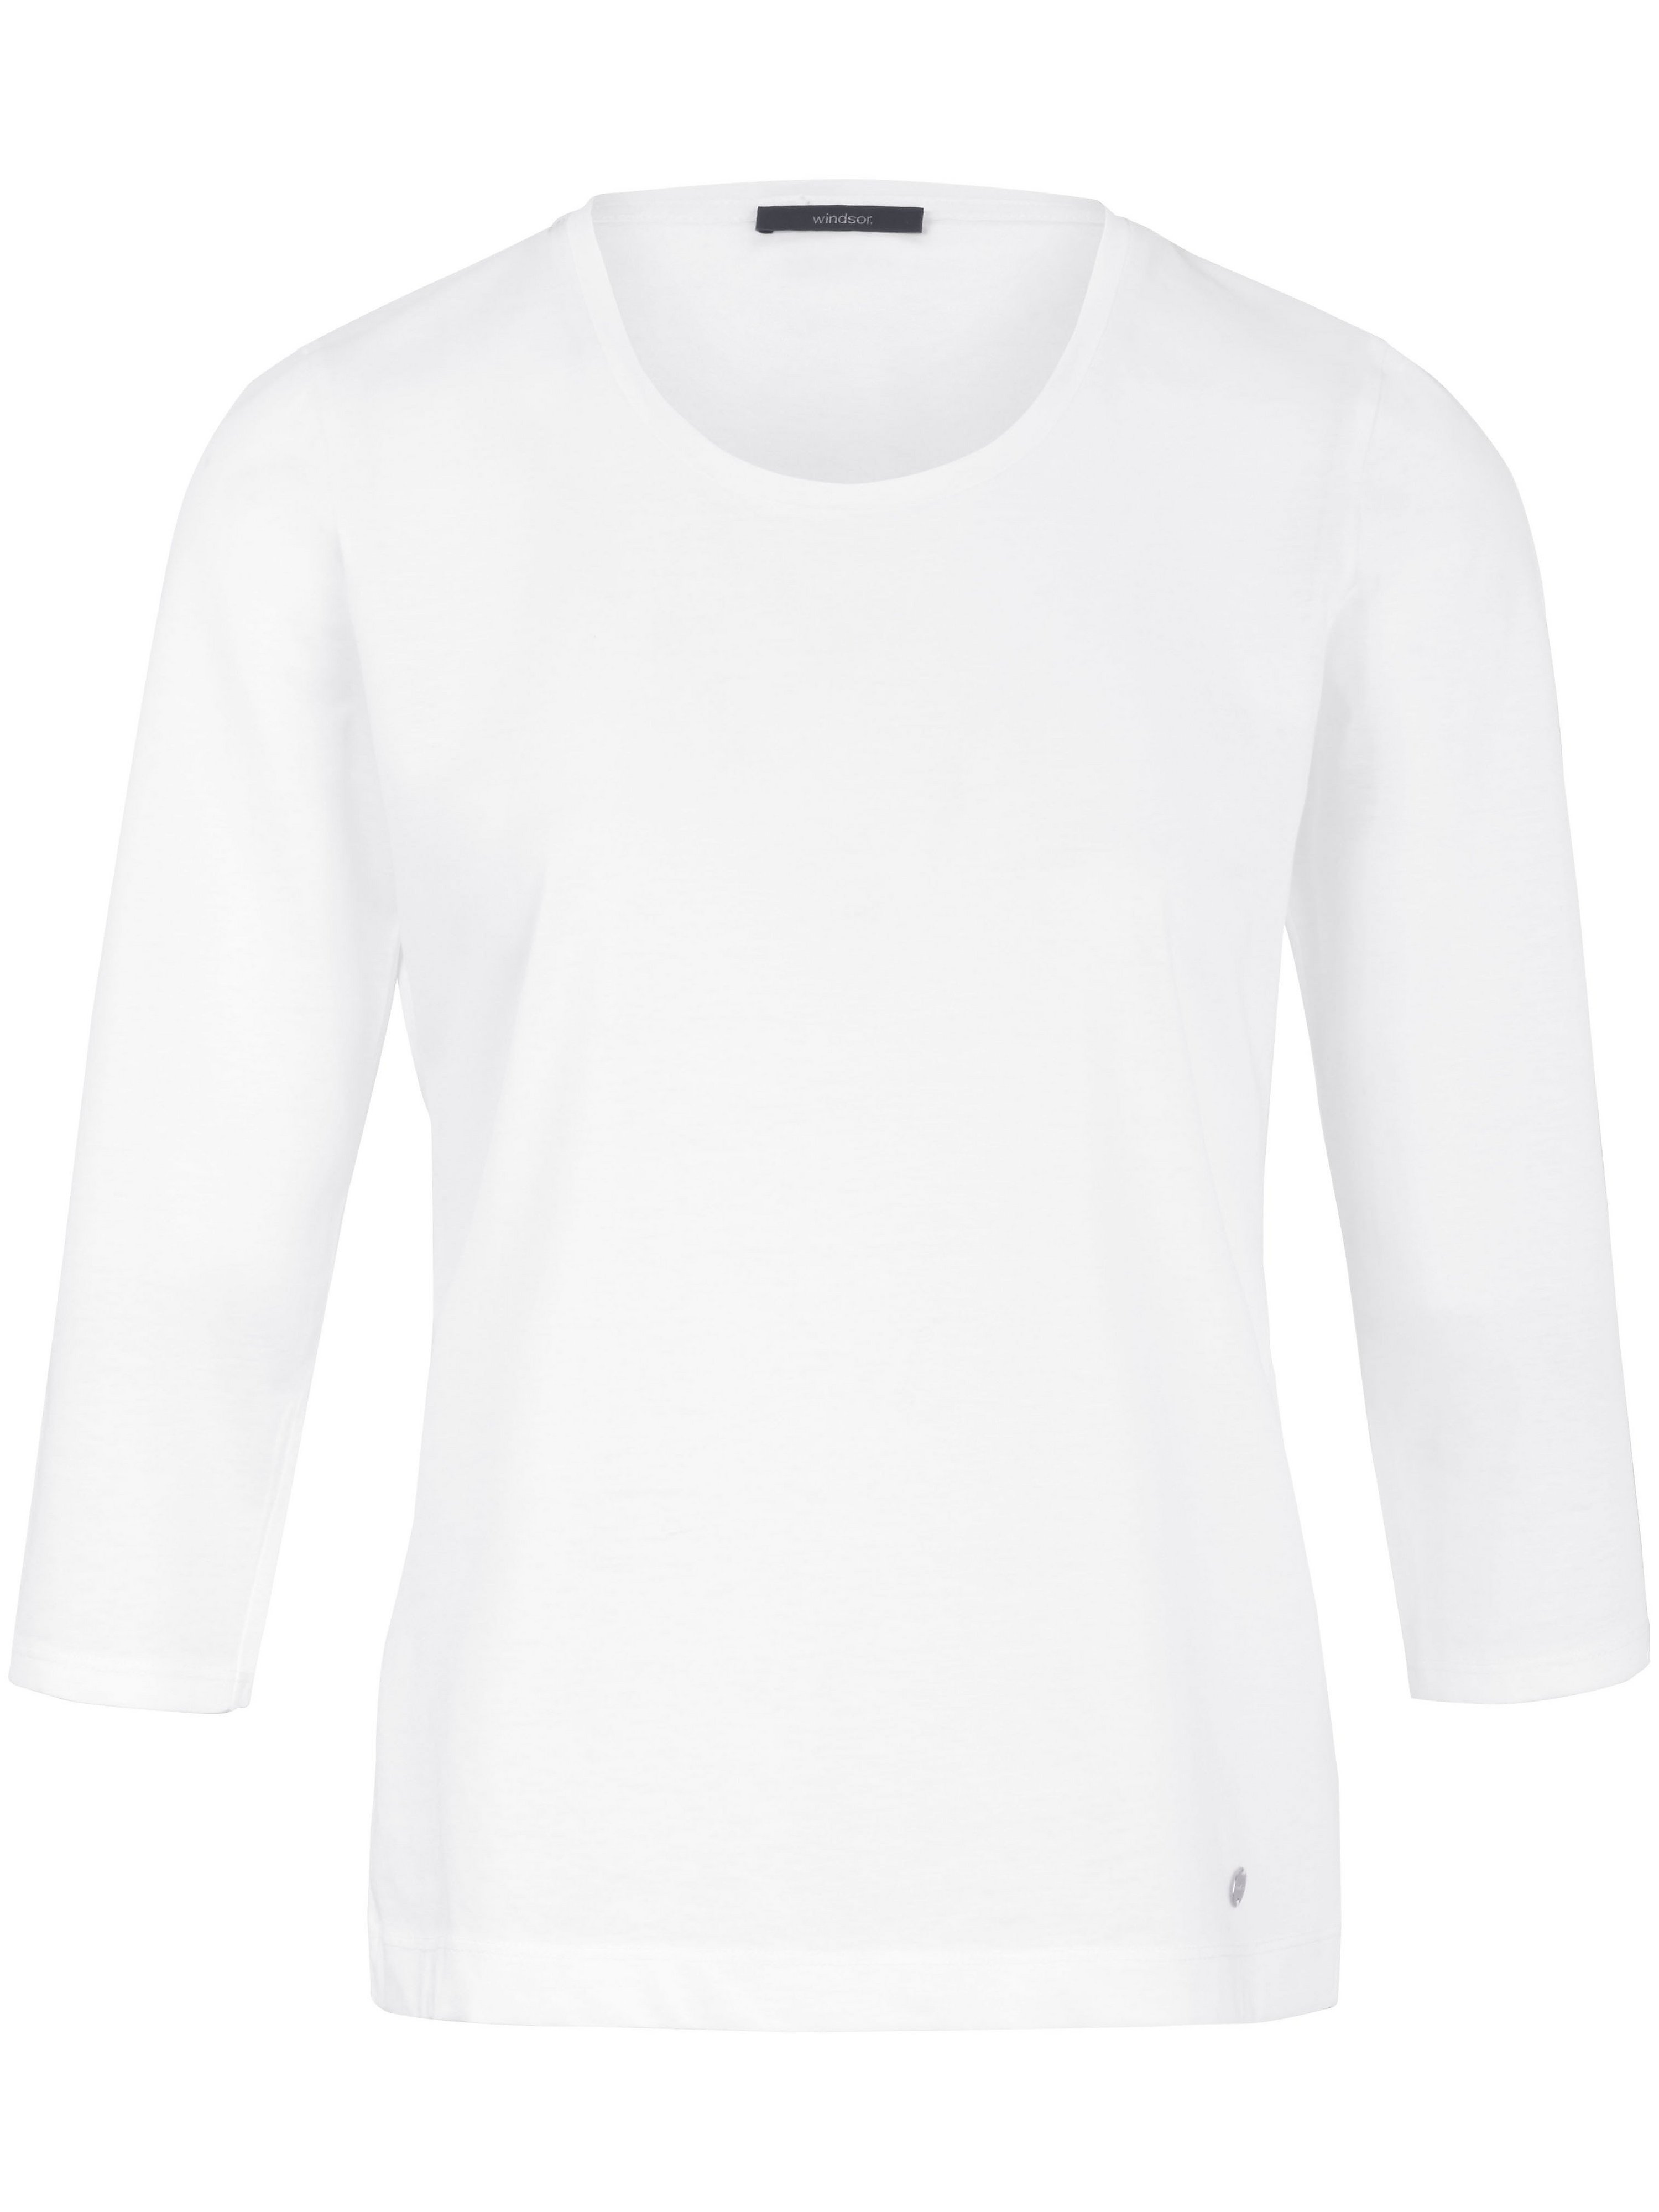 Le T-shirt manches 3/4 pur coton  Windsor blanc taille 36